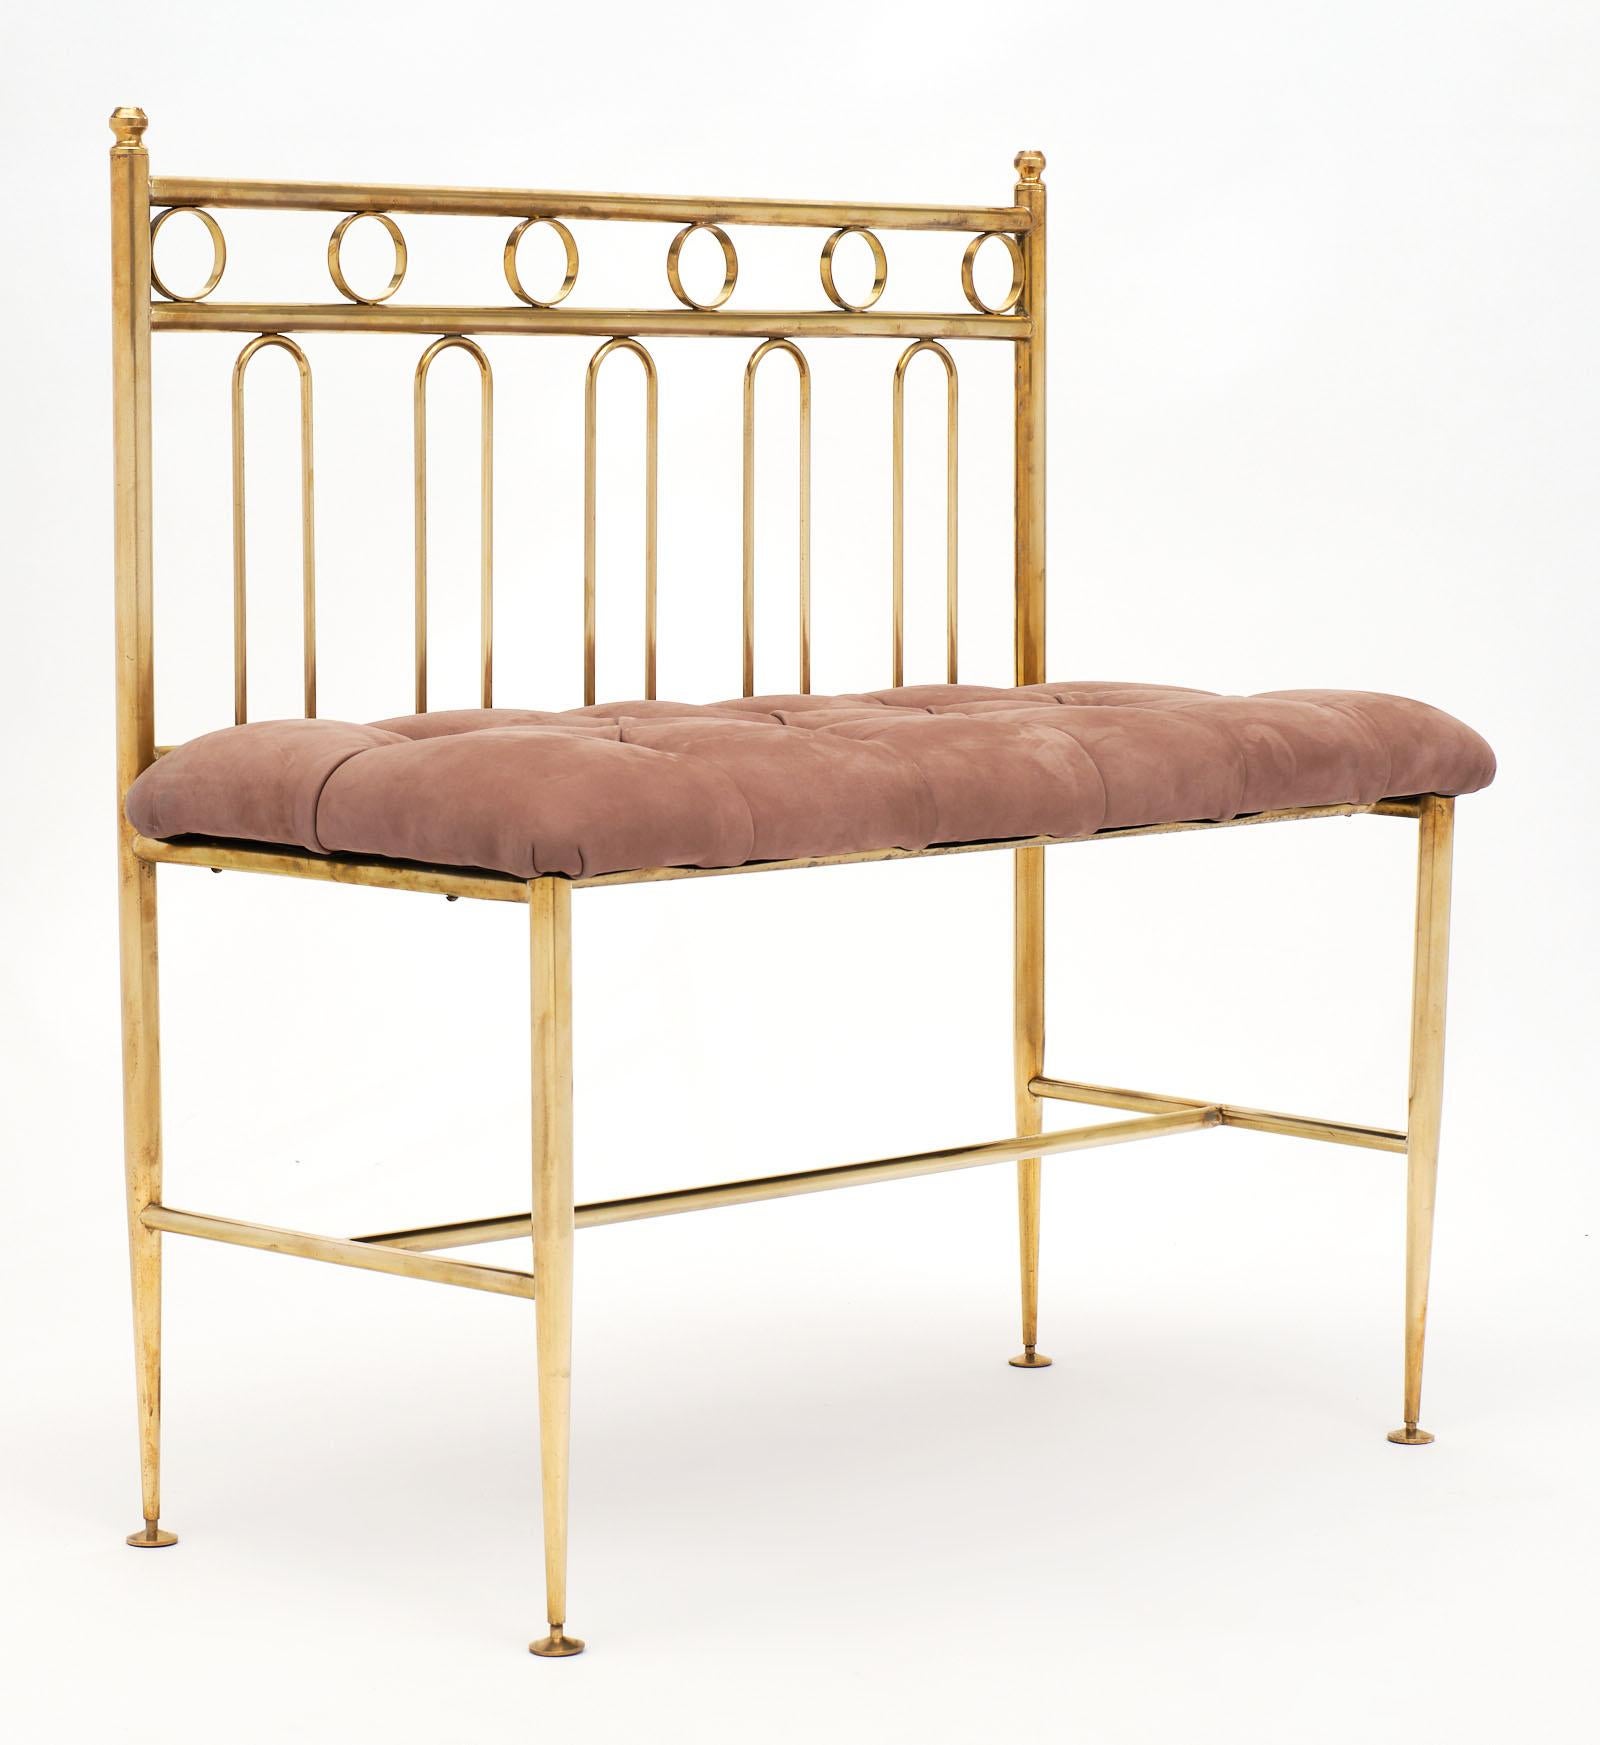 Italian Art Deco period bench made of solid brass with a tufted suede seat. We love the elegant lines and size of this piece.